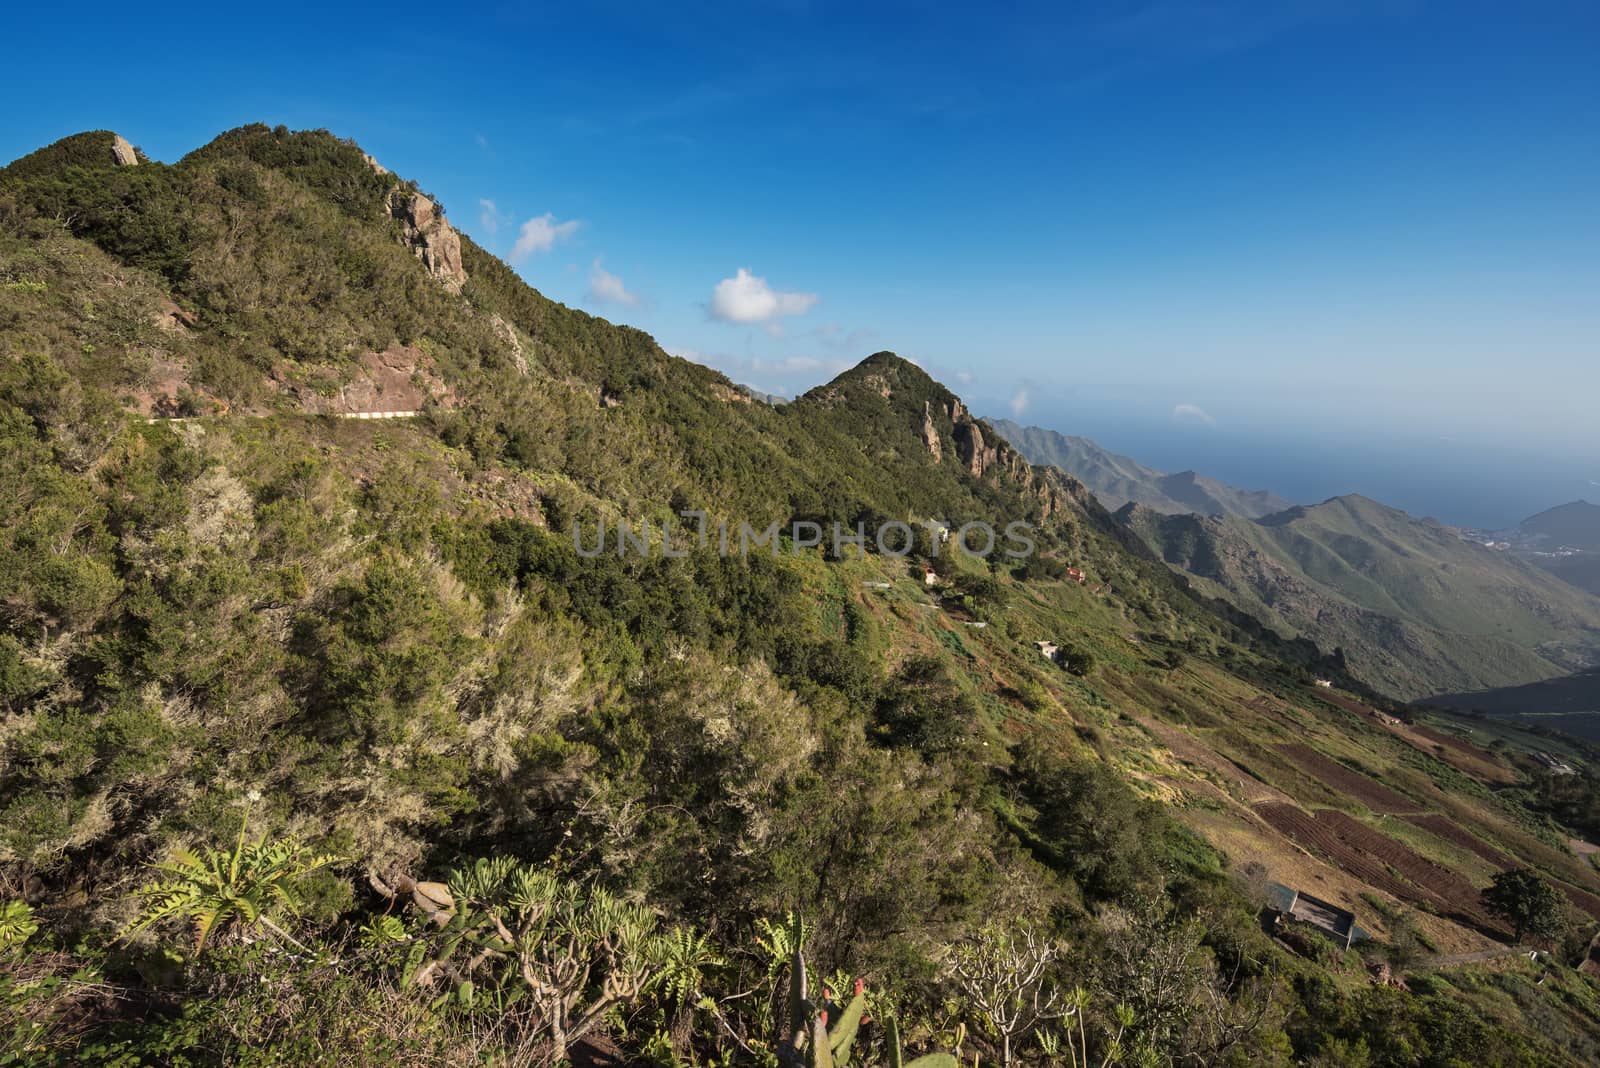 Scenic view of Anaga mountains, Tenerife, Canary islands, Spain.